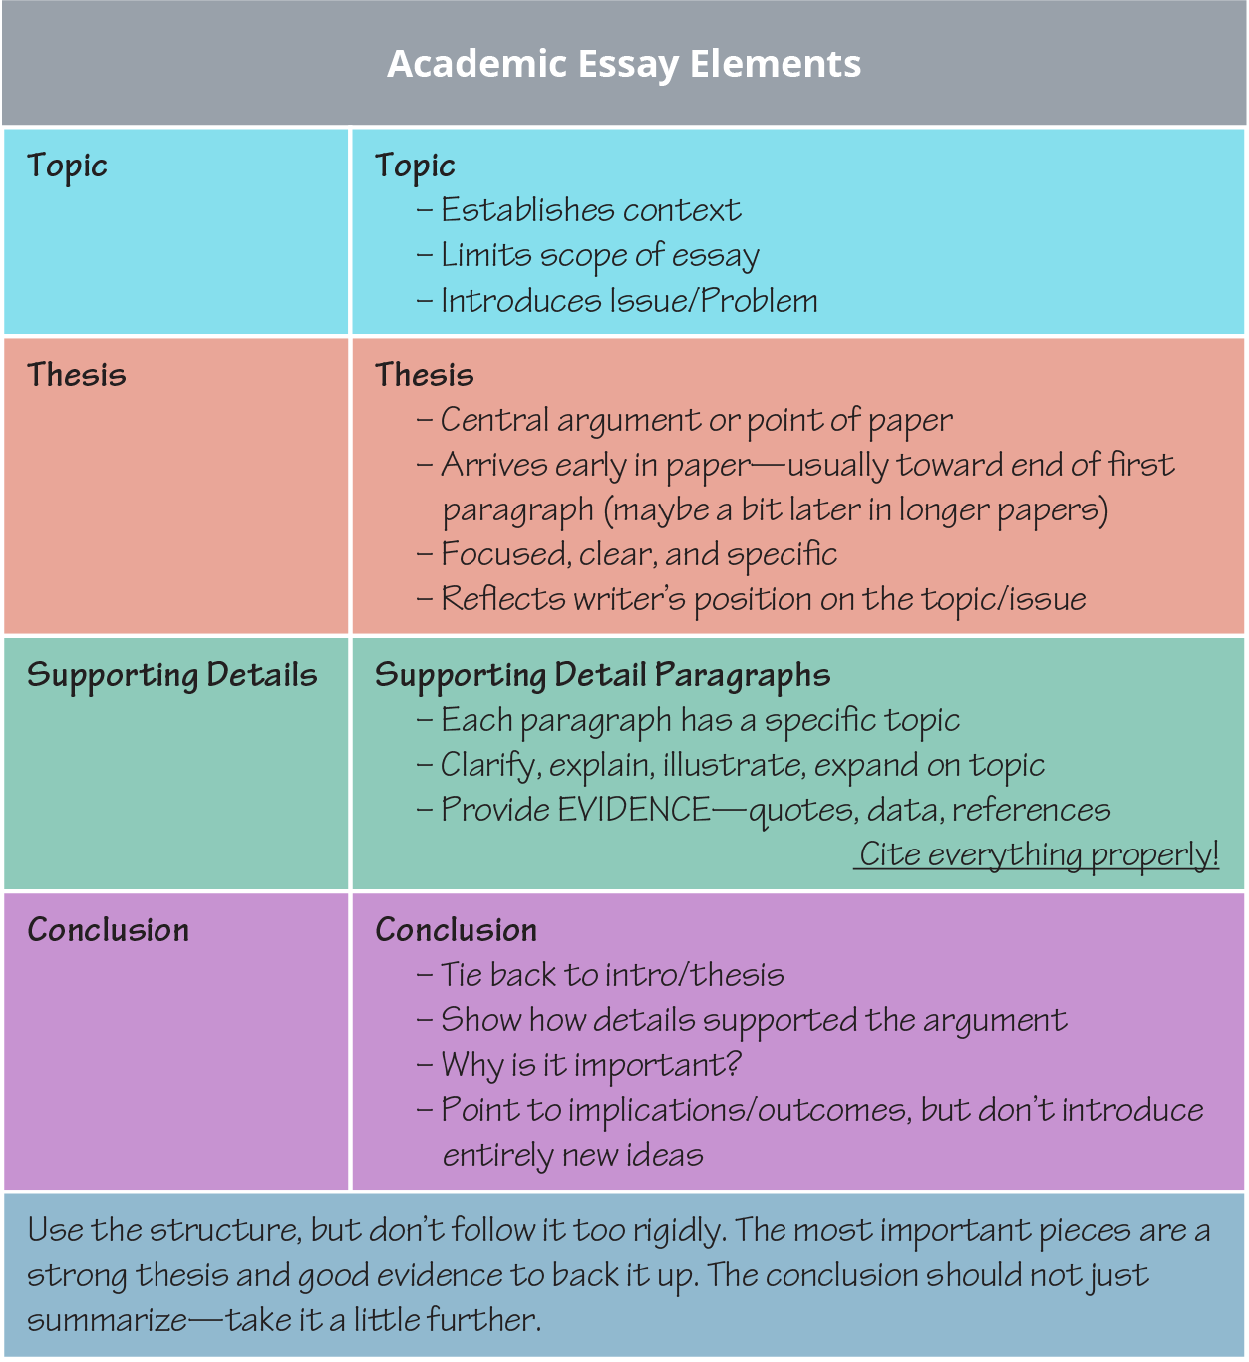 A chart shows “Topic,” “Thesis,” “Supporting Details,” and “Conclusion” as the four academic essay elements.